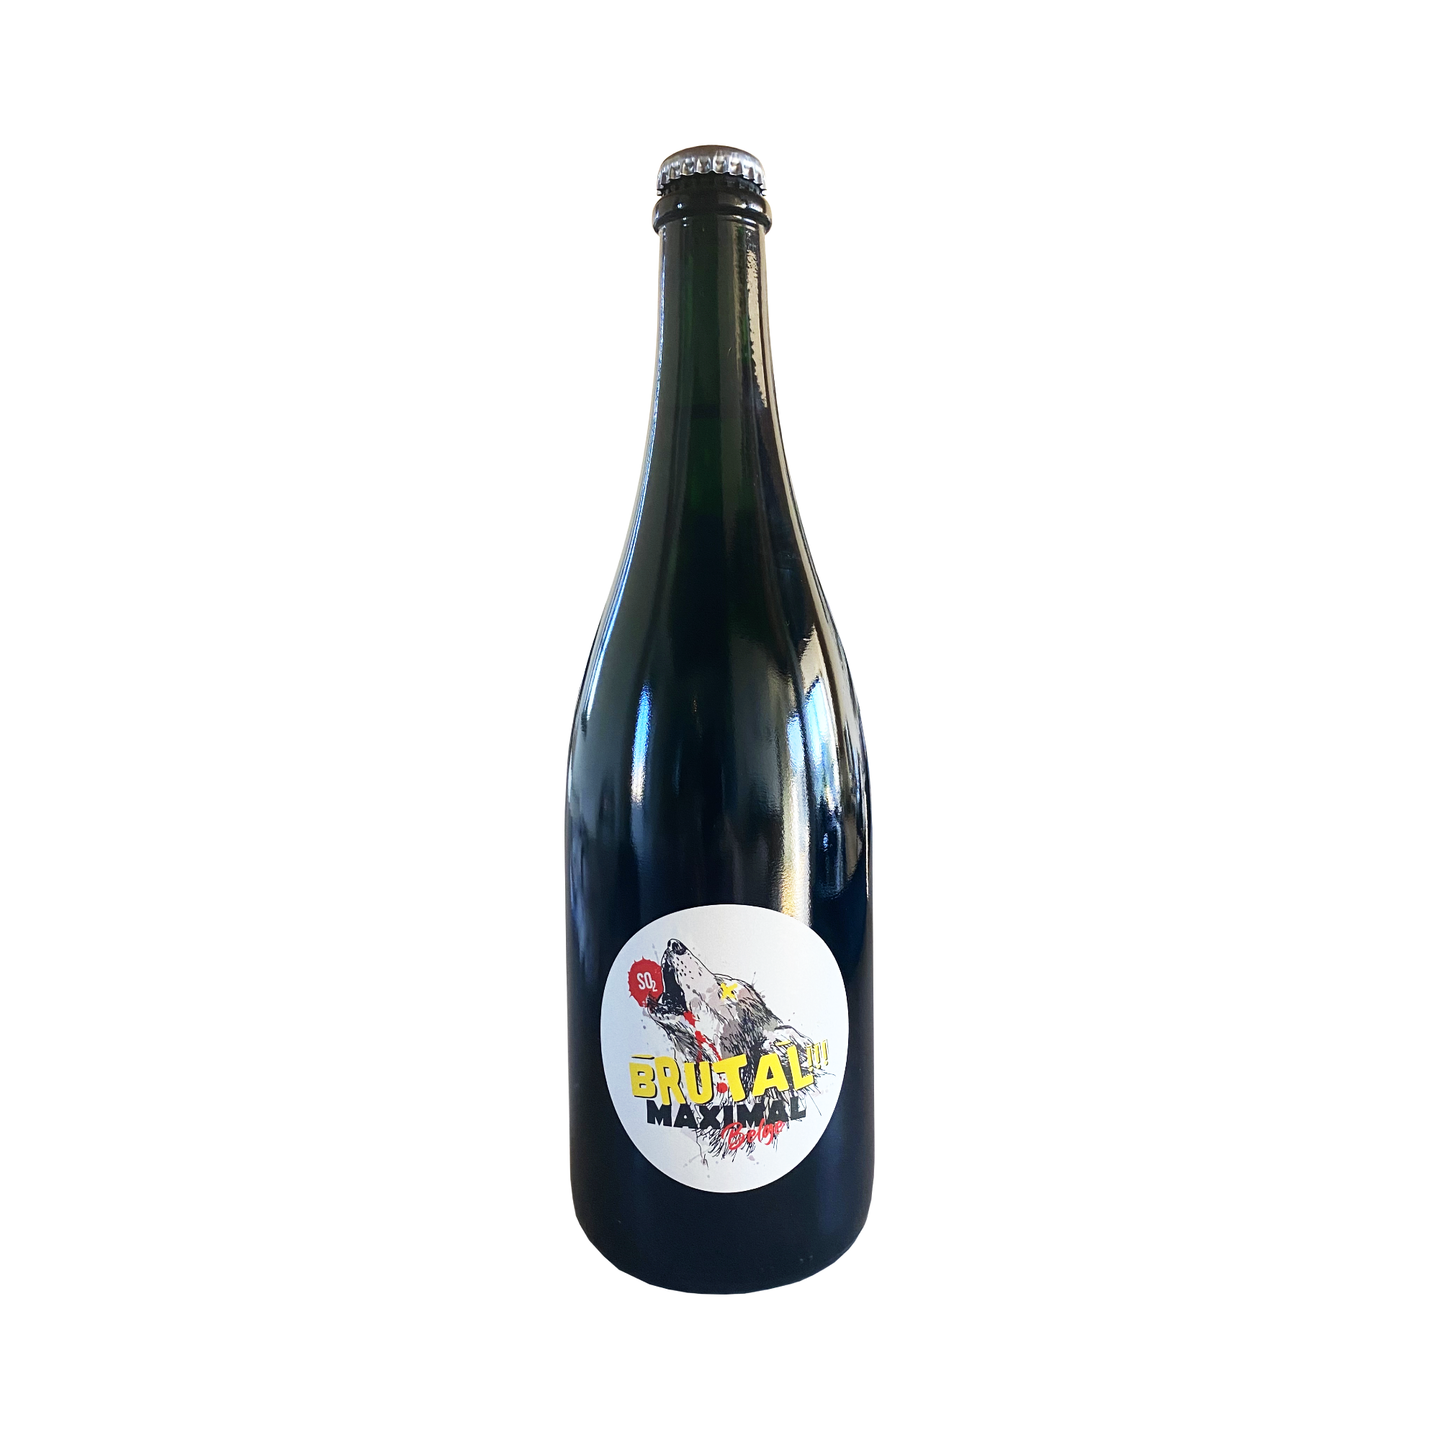 Natural Wines With a Story x Optimbulles - Brutal Maximal Belge - Chardonnay 2018